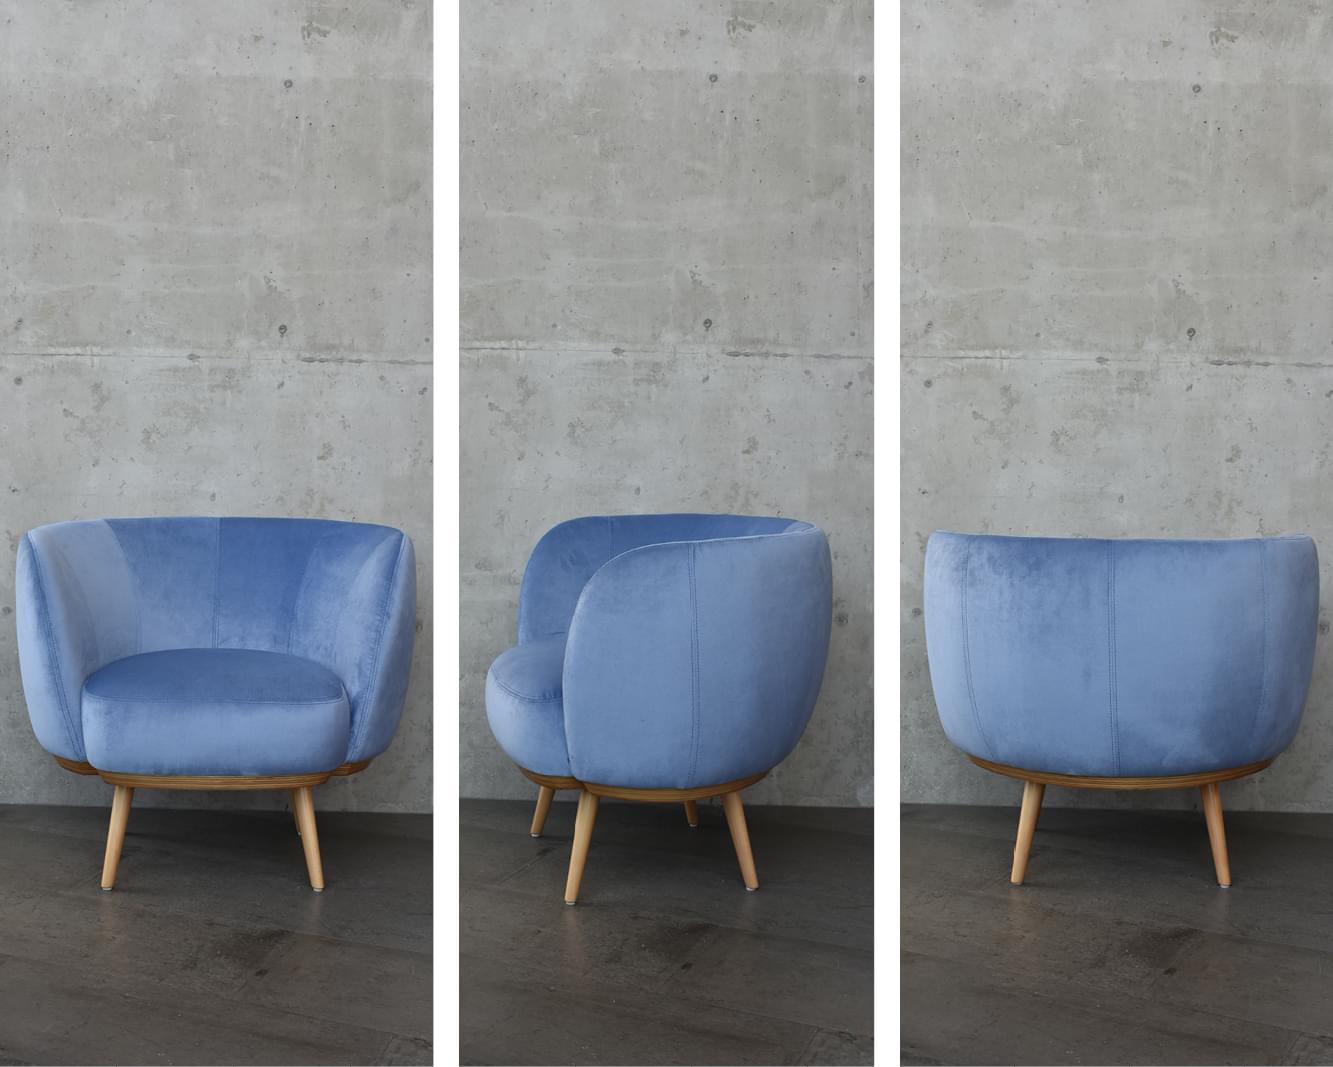 Cosmo lounge chair - New boutique hotel furniture as seen at the Salone del Mobile Milano April, 2019